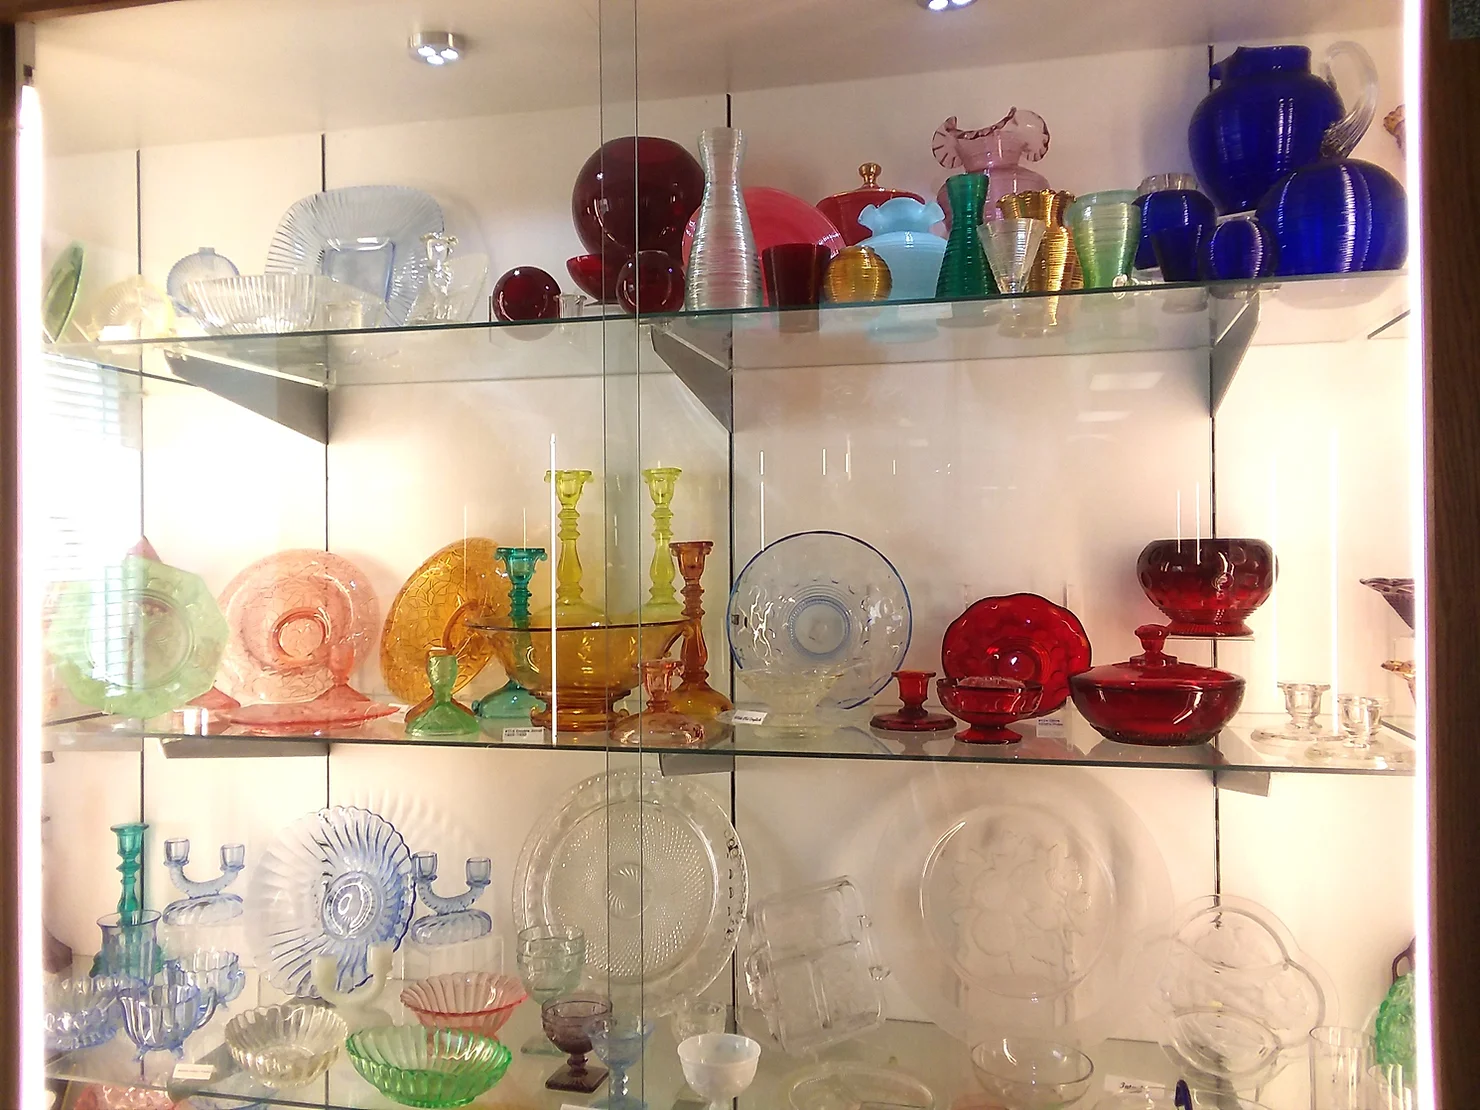 Display at the National Glass Museum